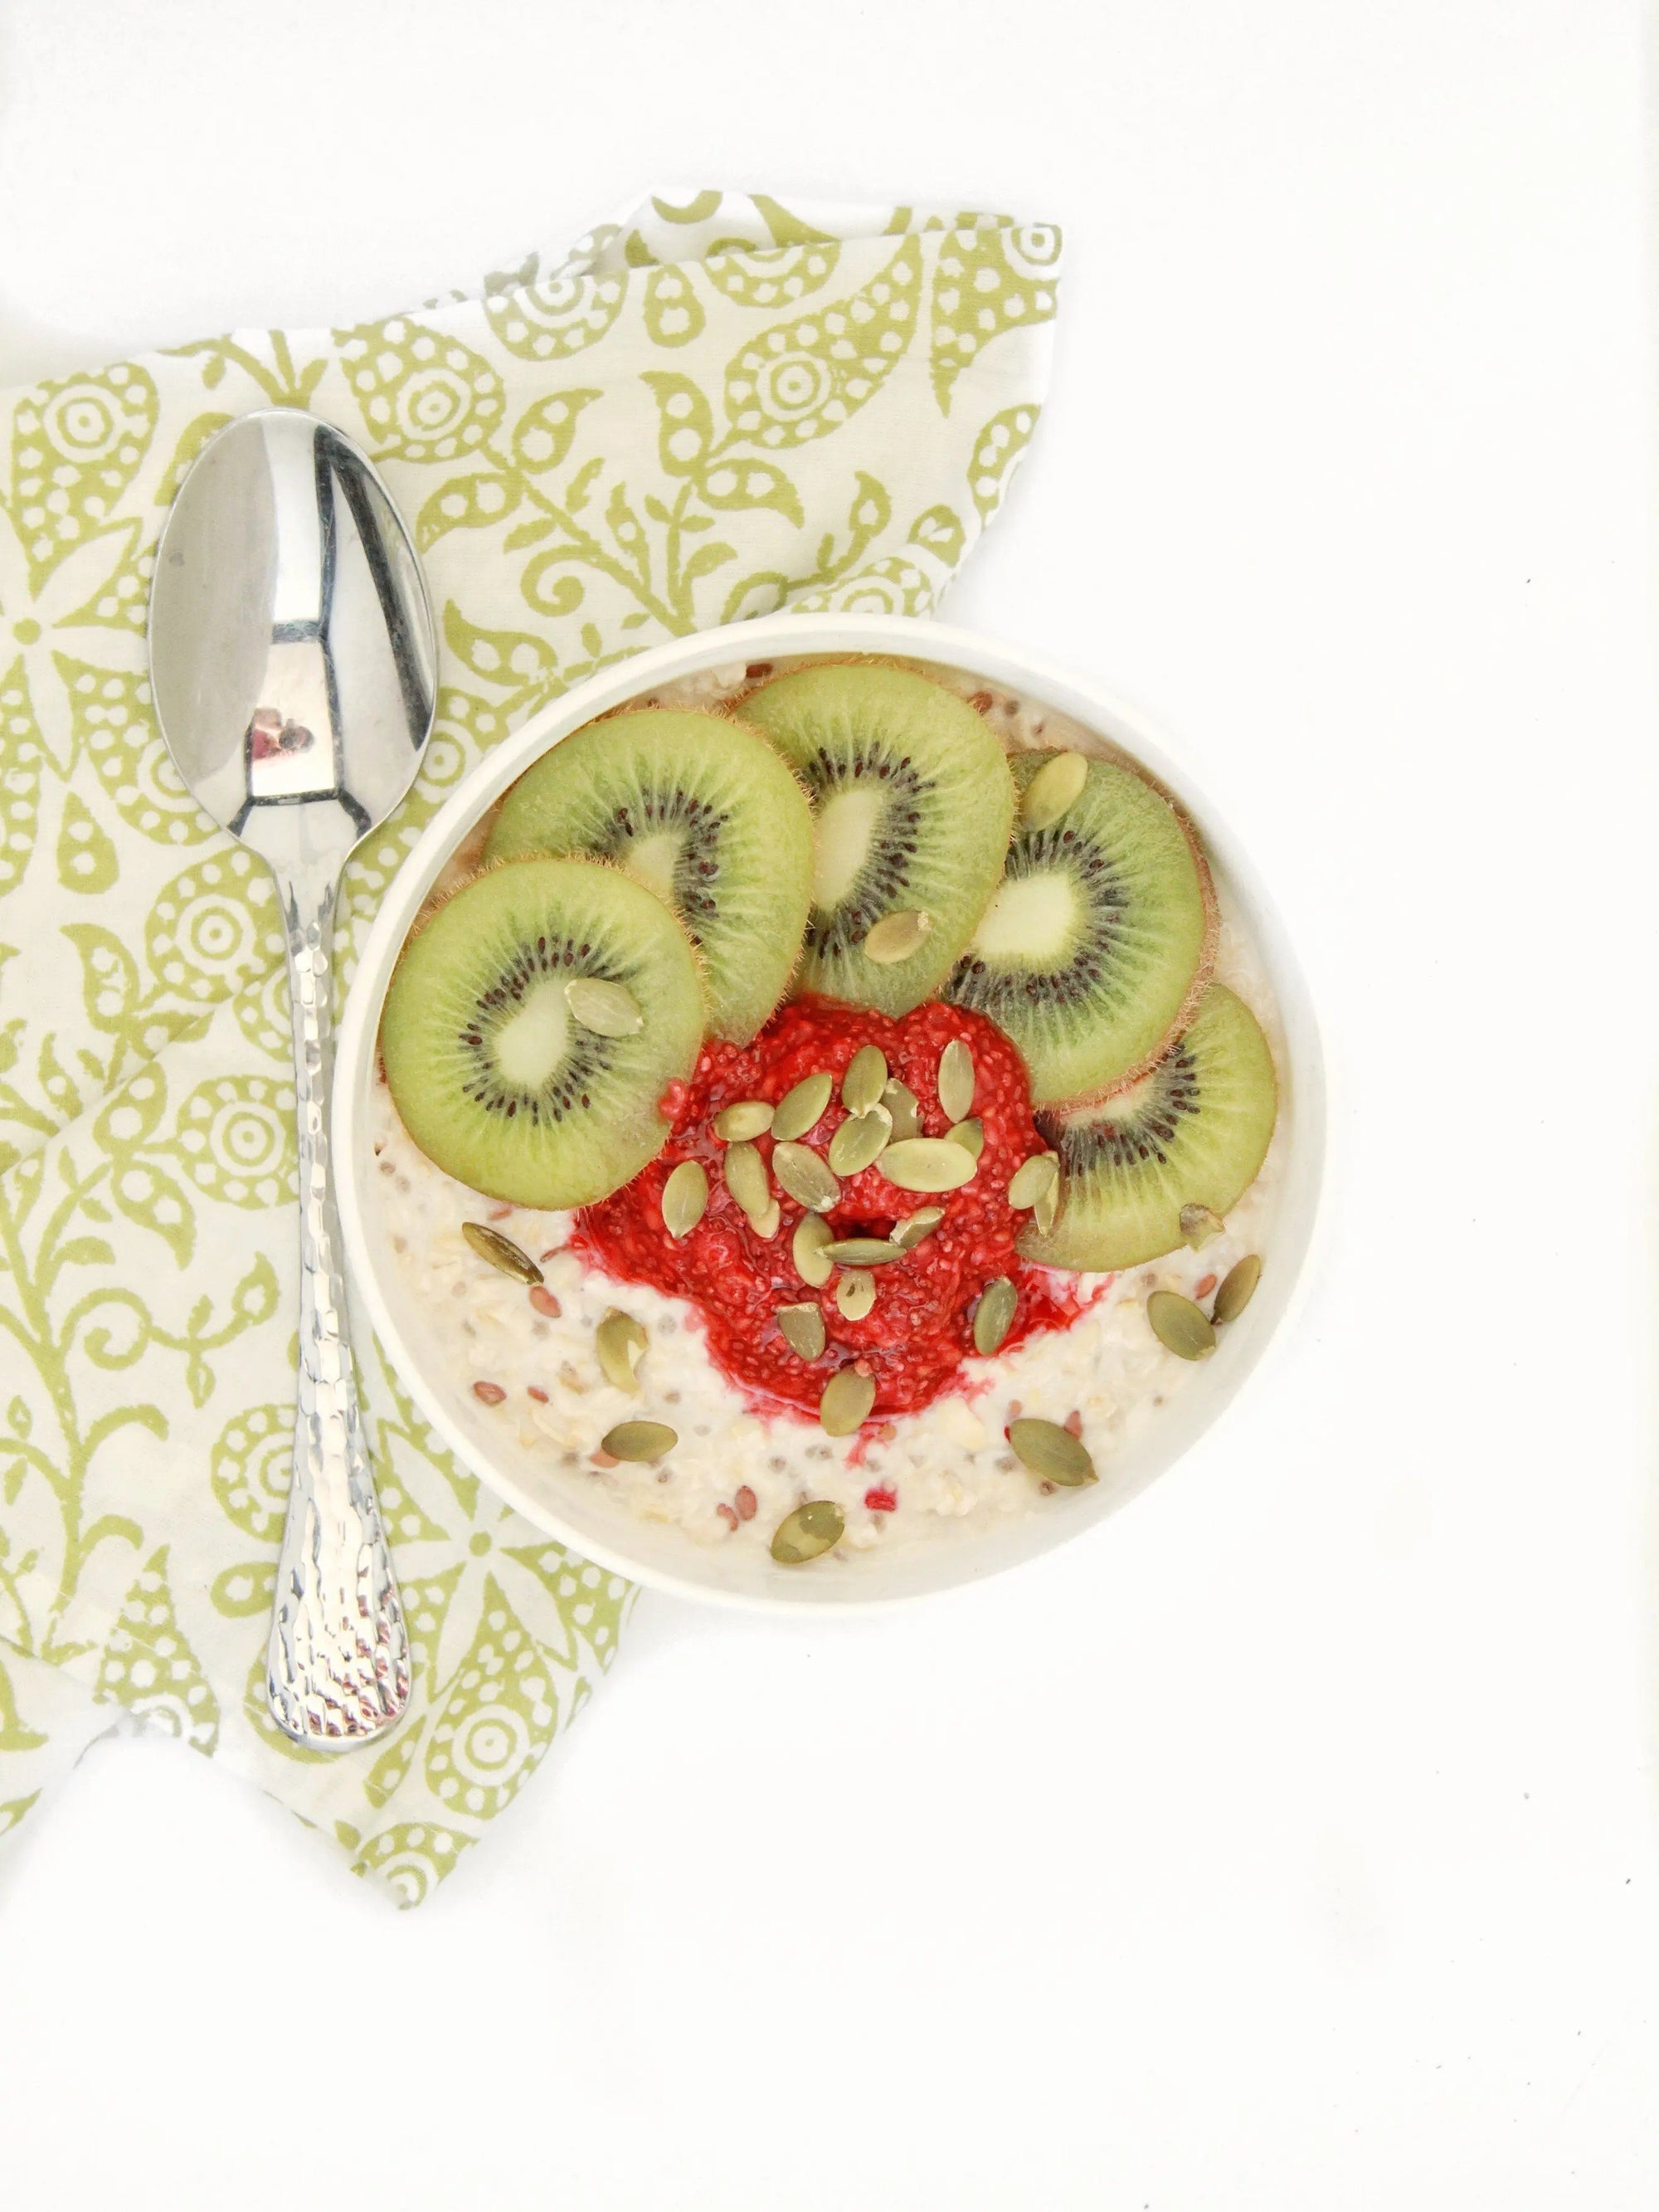 A decorative bowl of raspberry oatmeal with fresh kiwi toppings with pumpkin seeds and chia pudding.